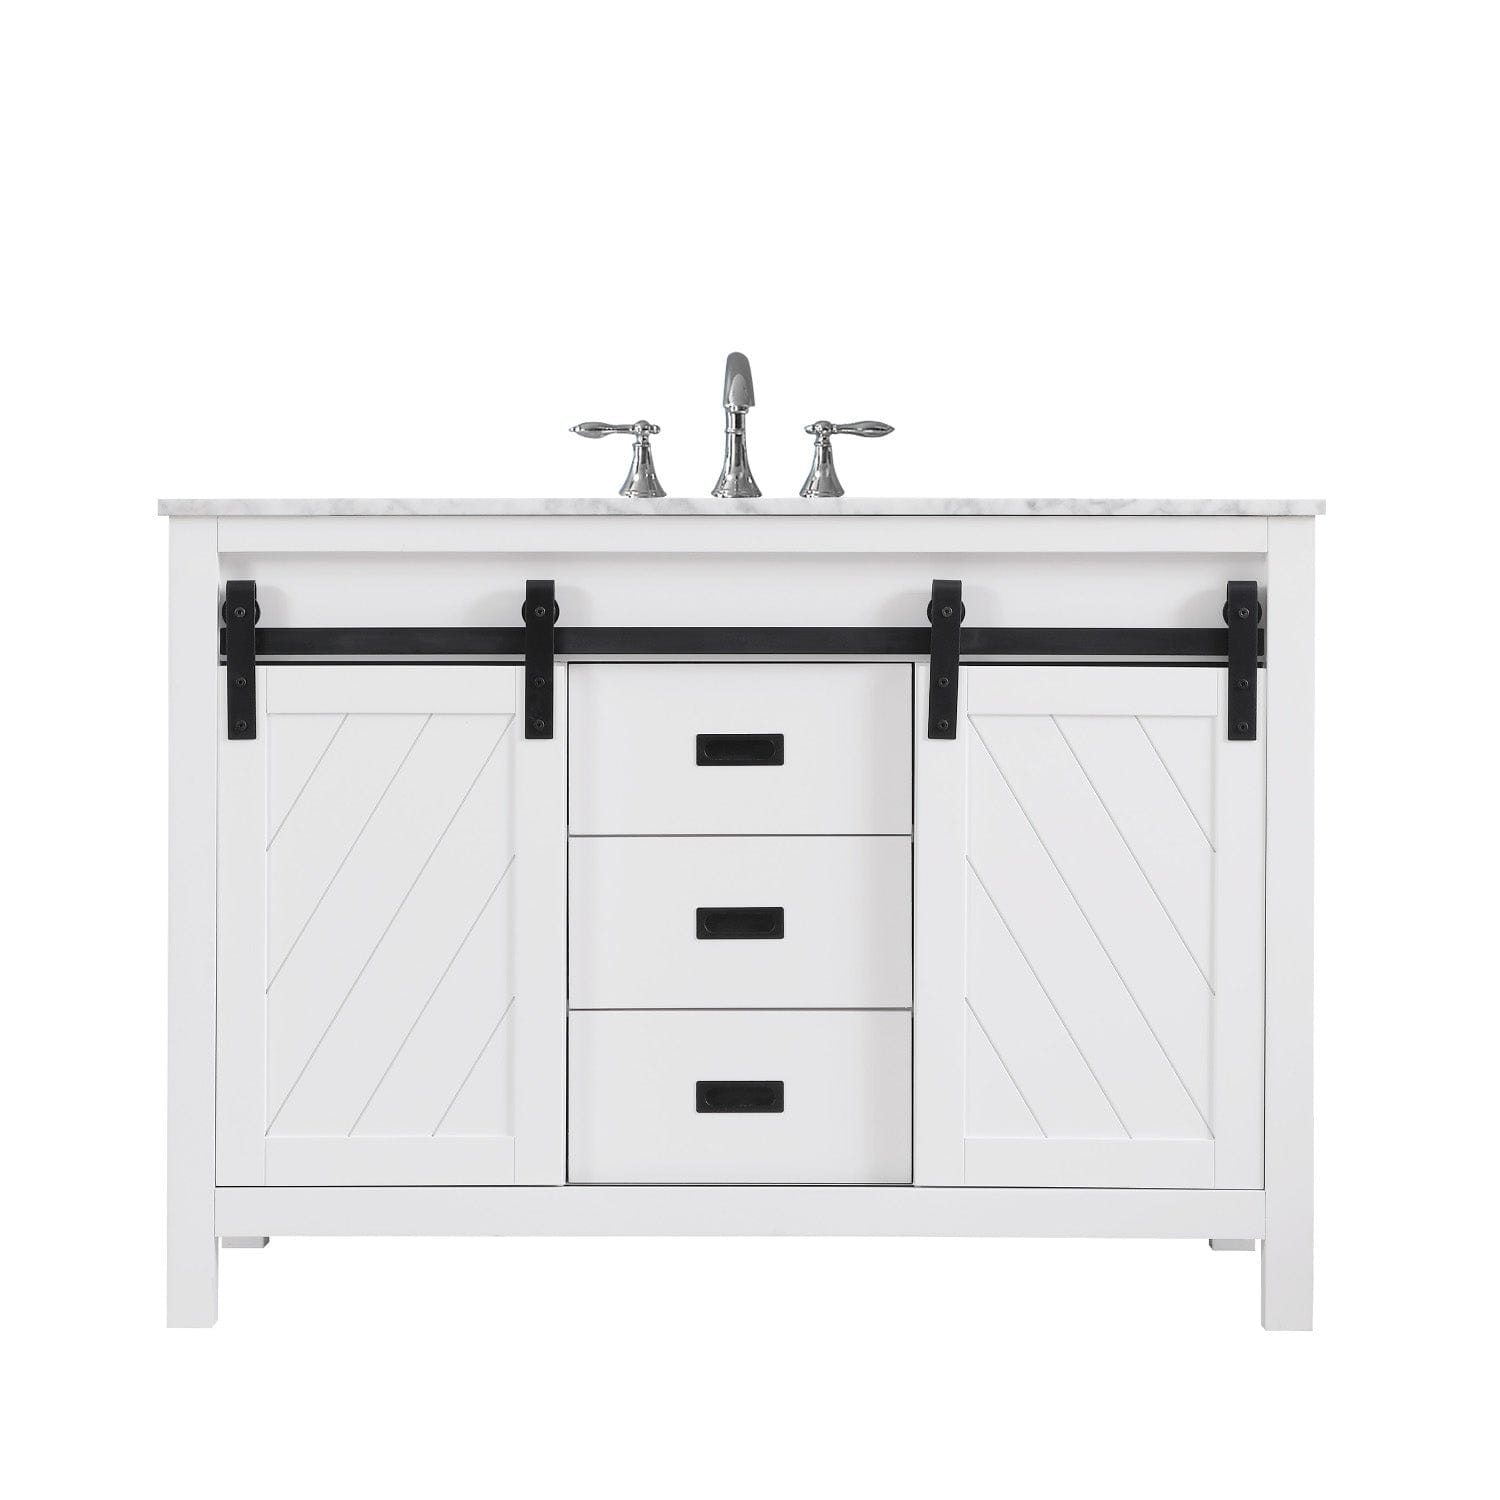 Altair Kinsley 48" Single Bathroom Vanity Set in White and Carrara White Marble Countertop without Mirror 536048-WH-CA-NM - Molaix631112970501Vanity536048-WH-CA-NM